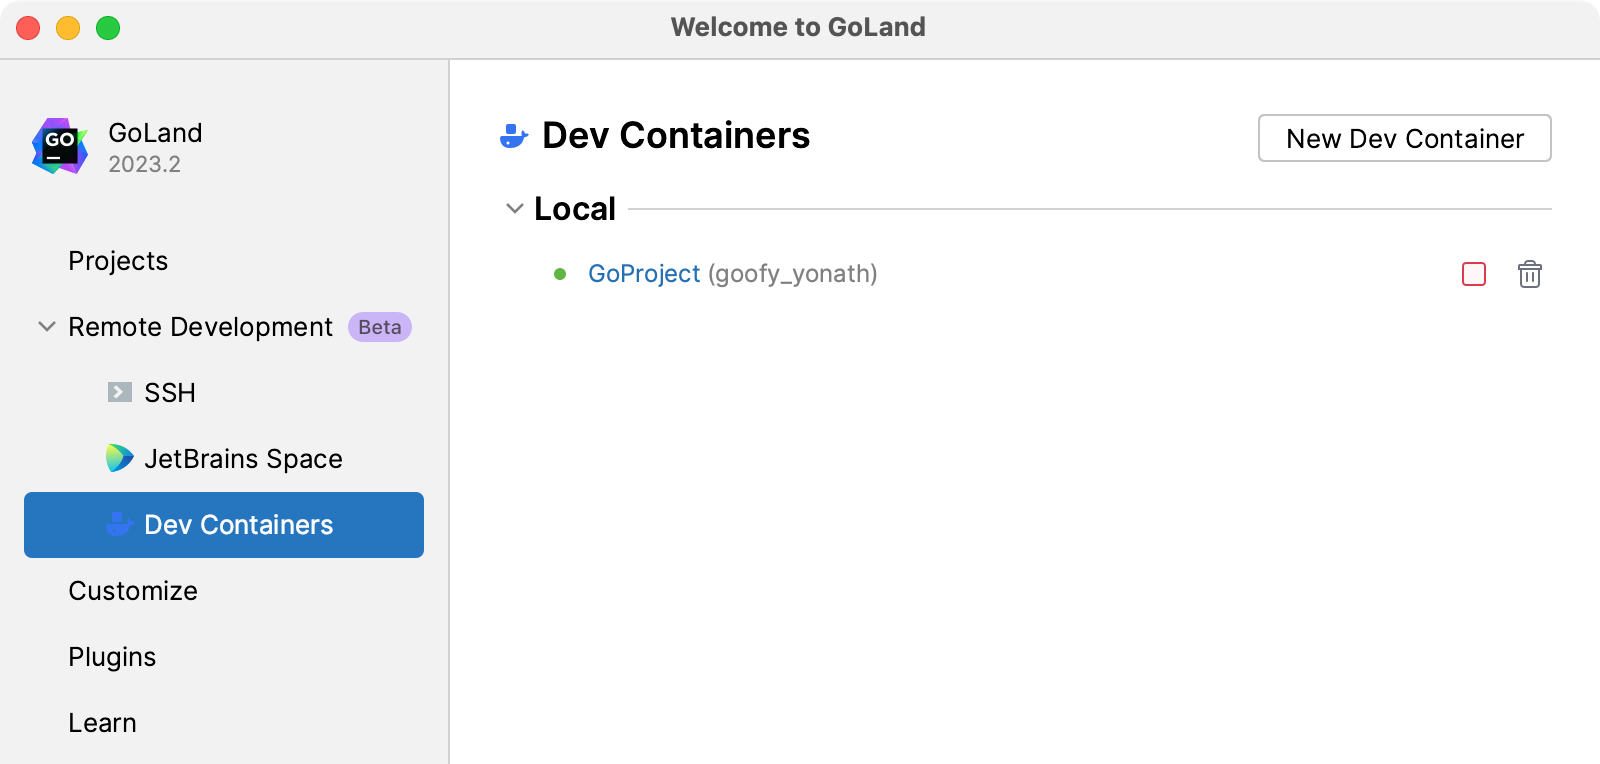 Recent Dev containers